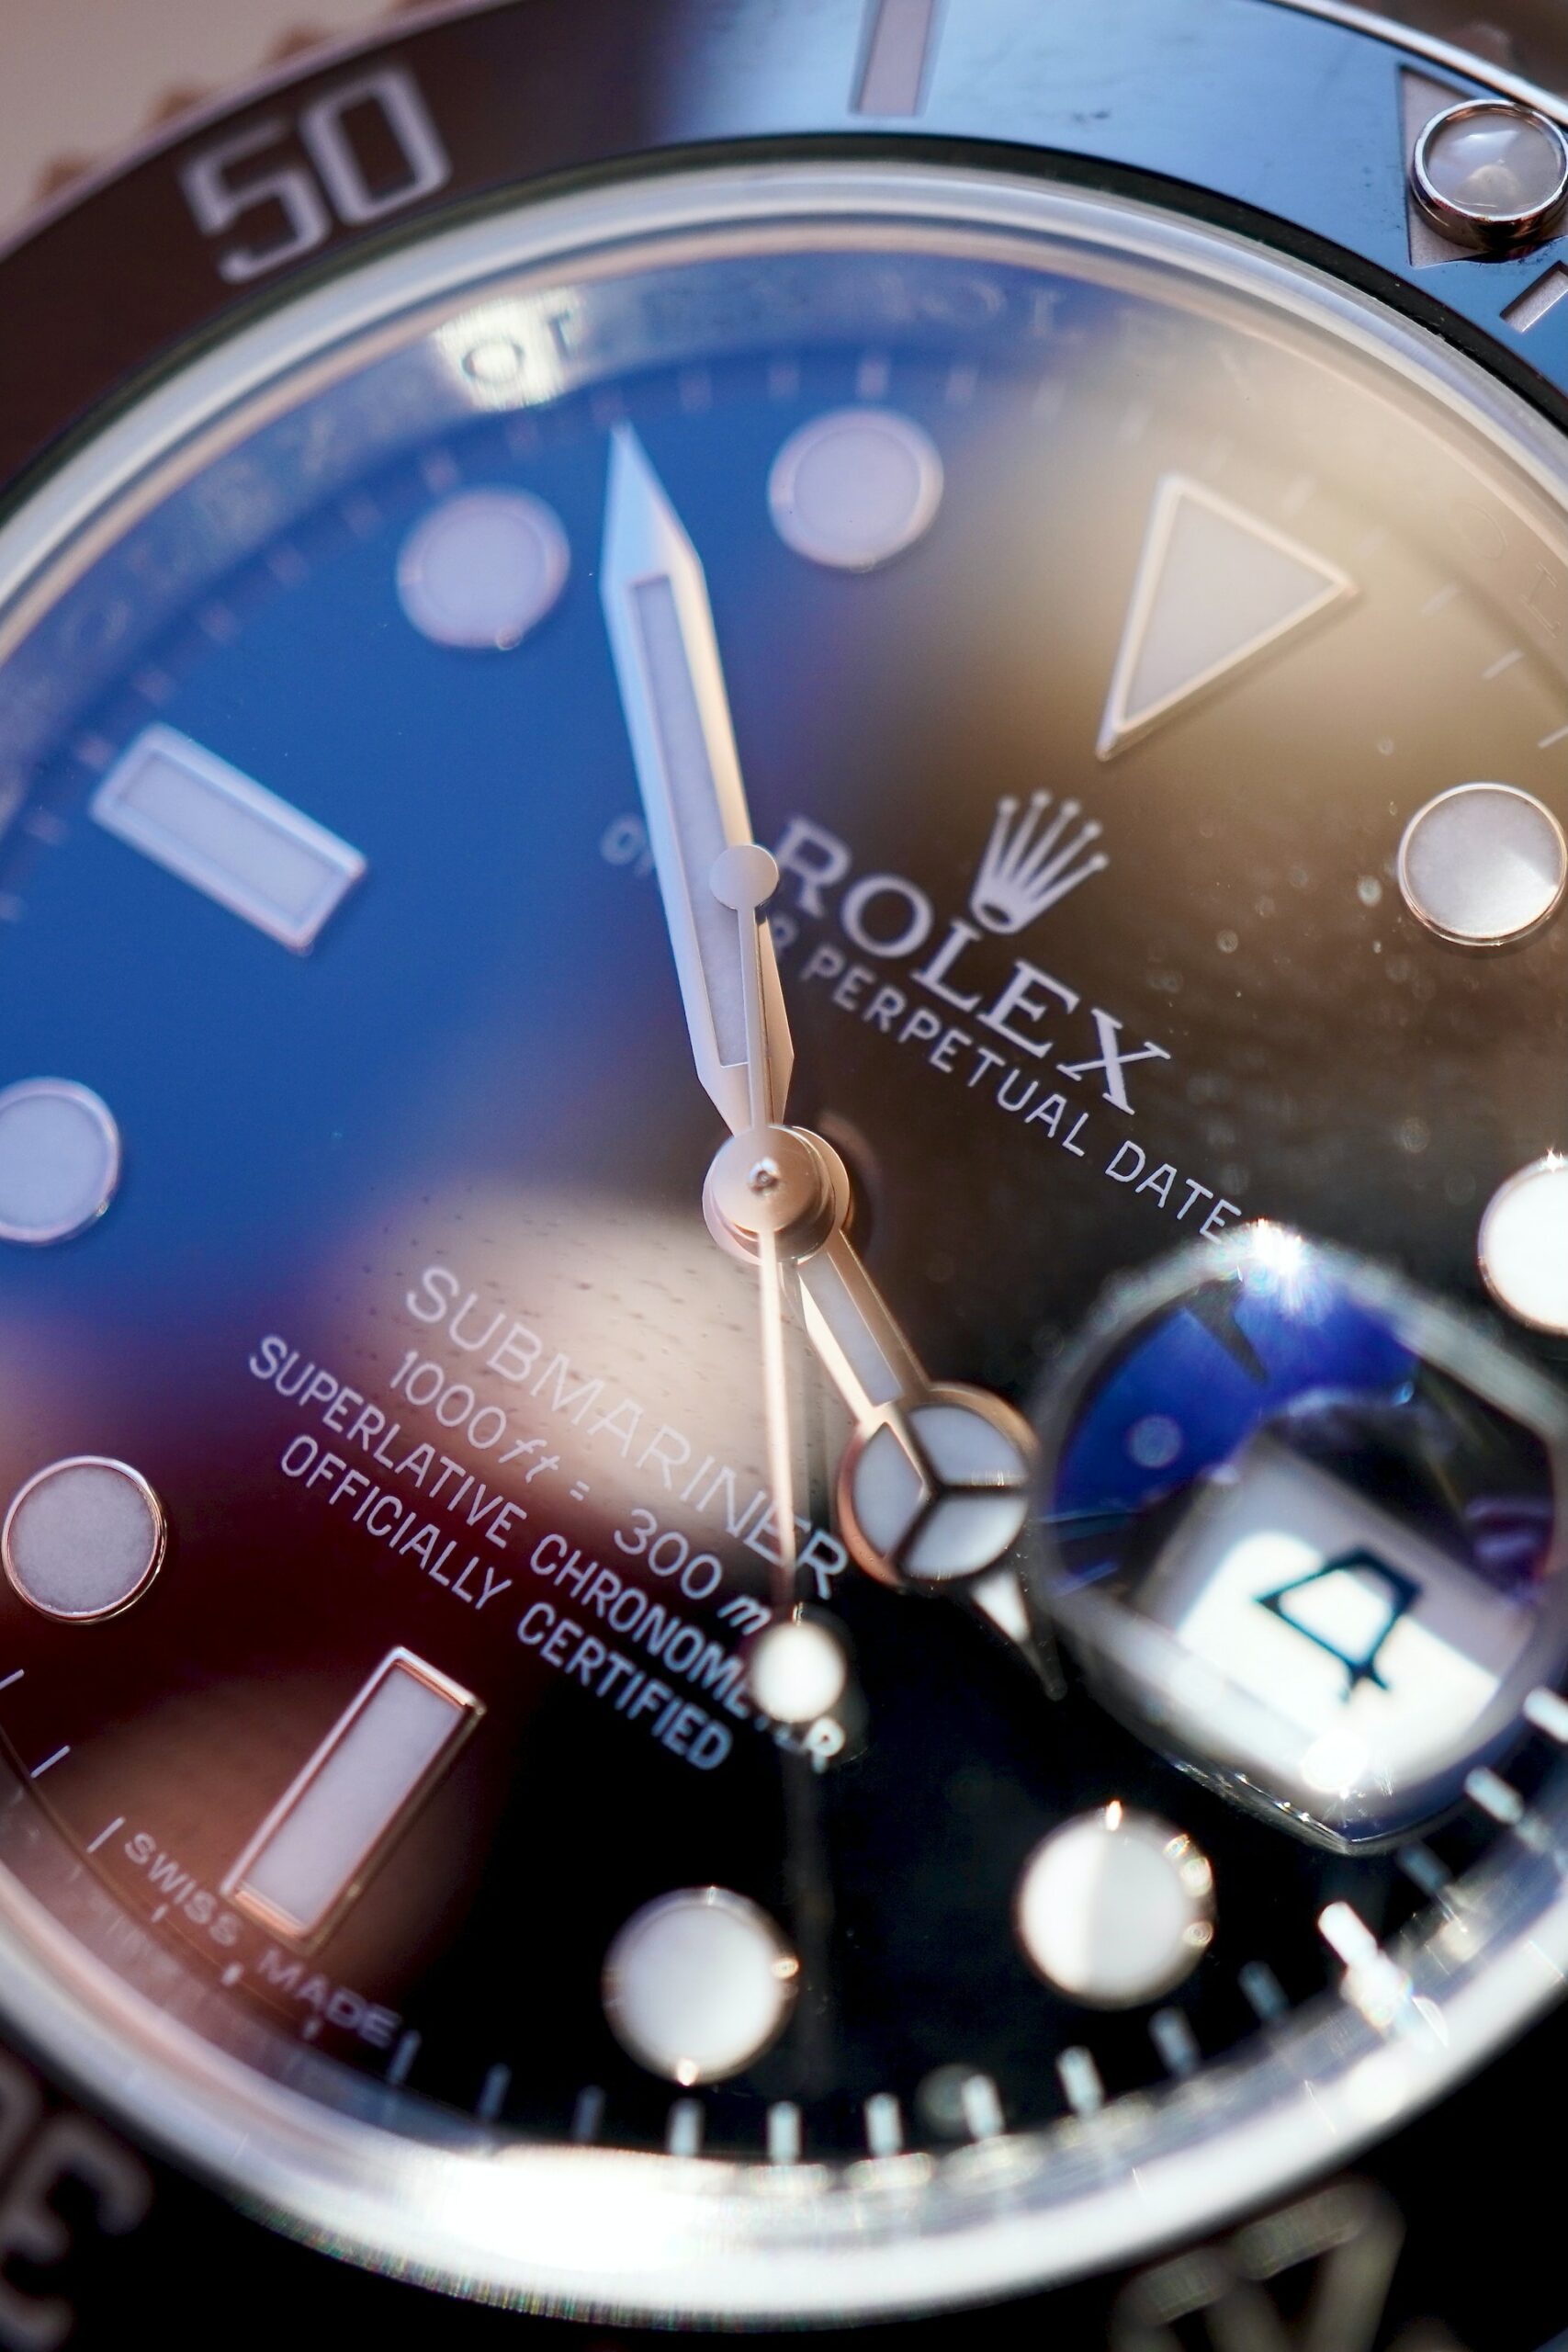 The Evolution of Rolex: From Tool Watch to Iconic Luxury Timepiece